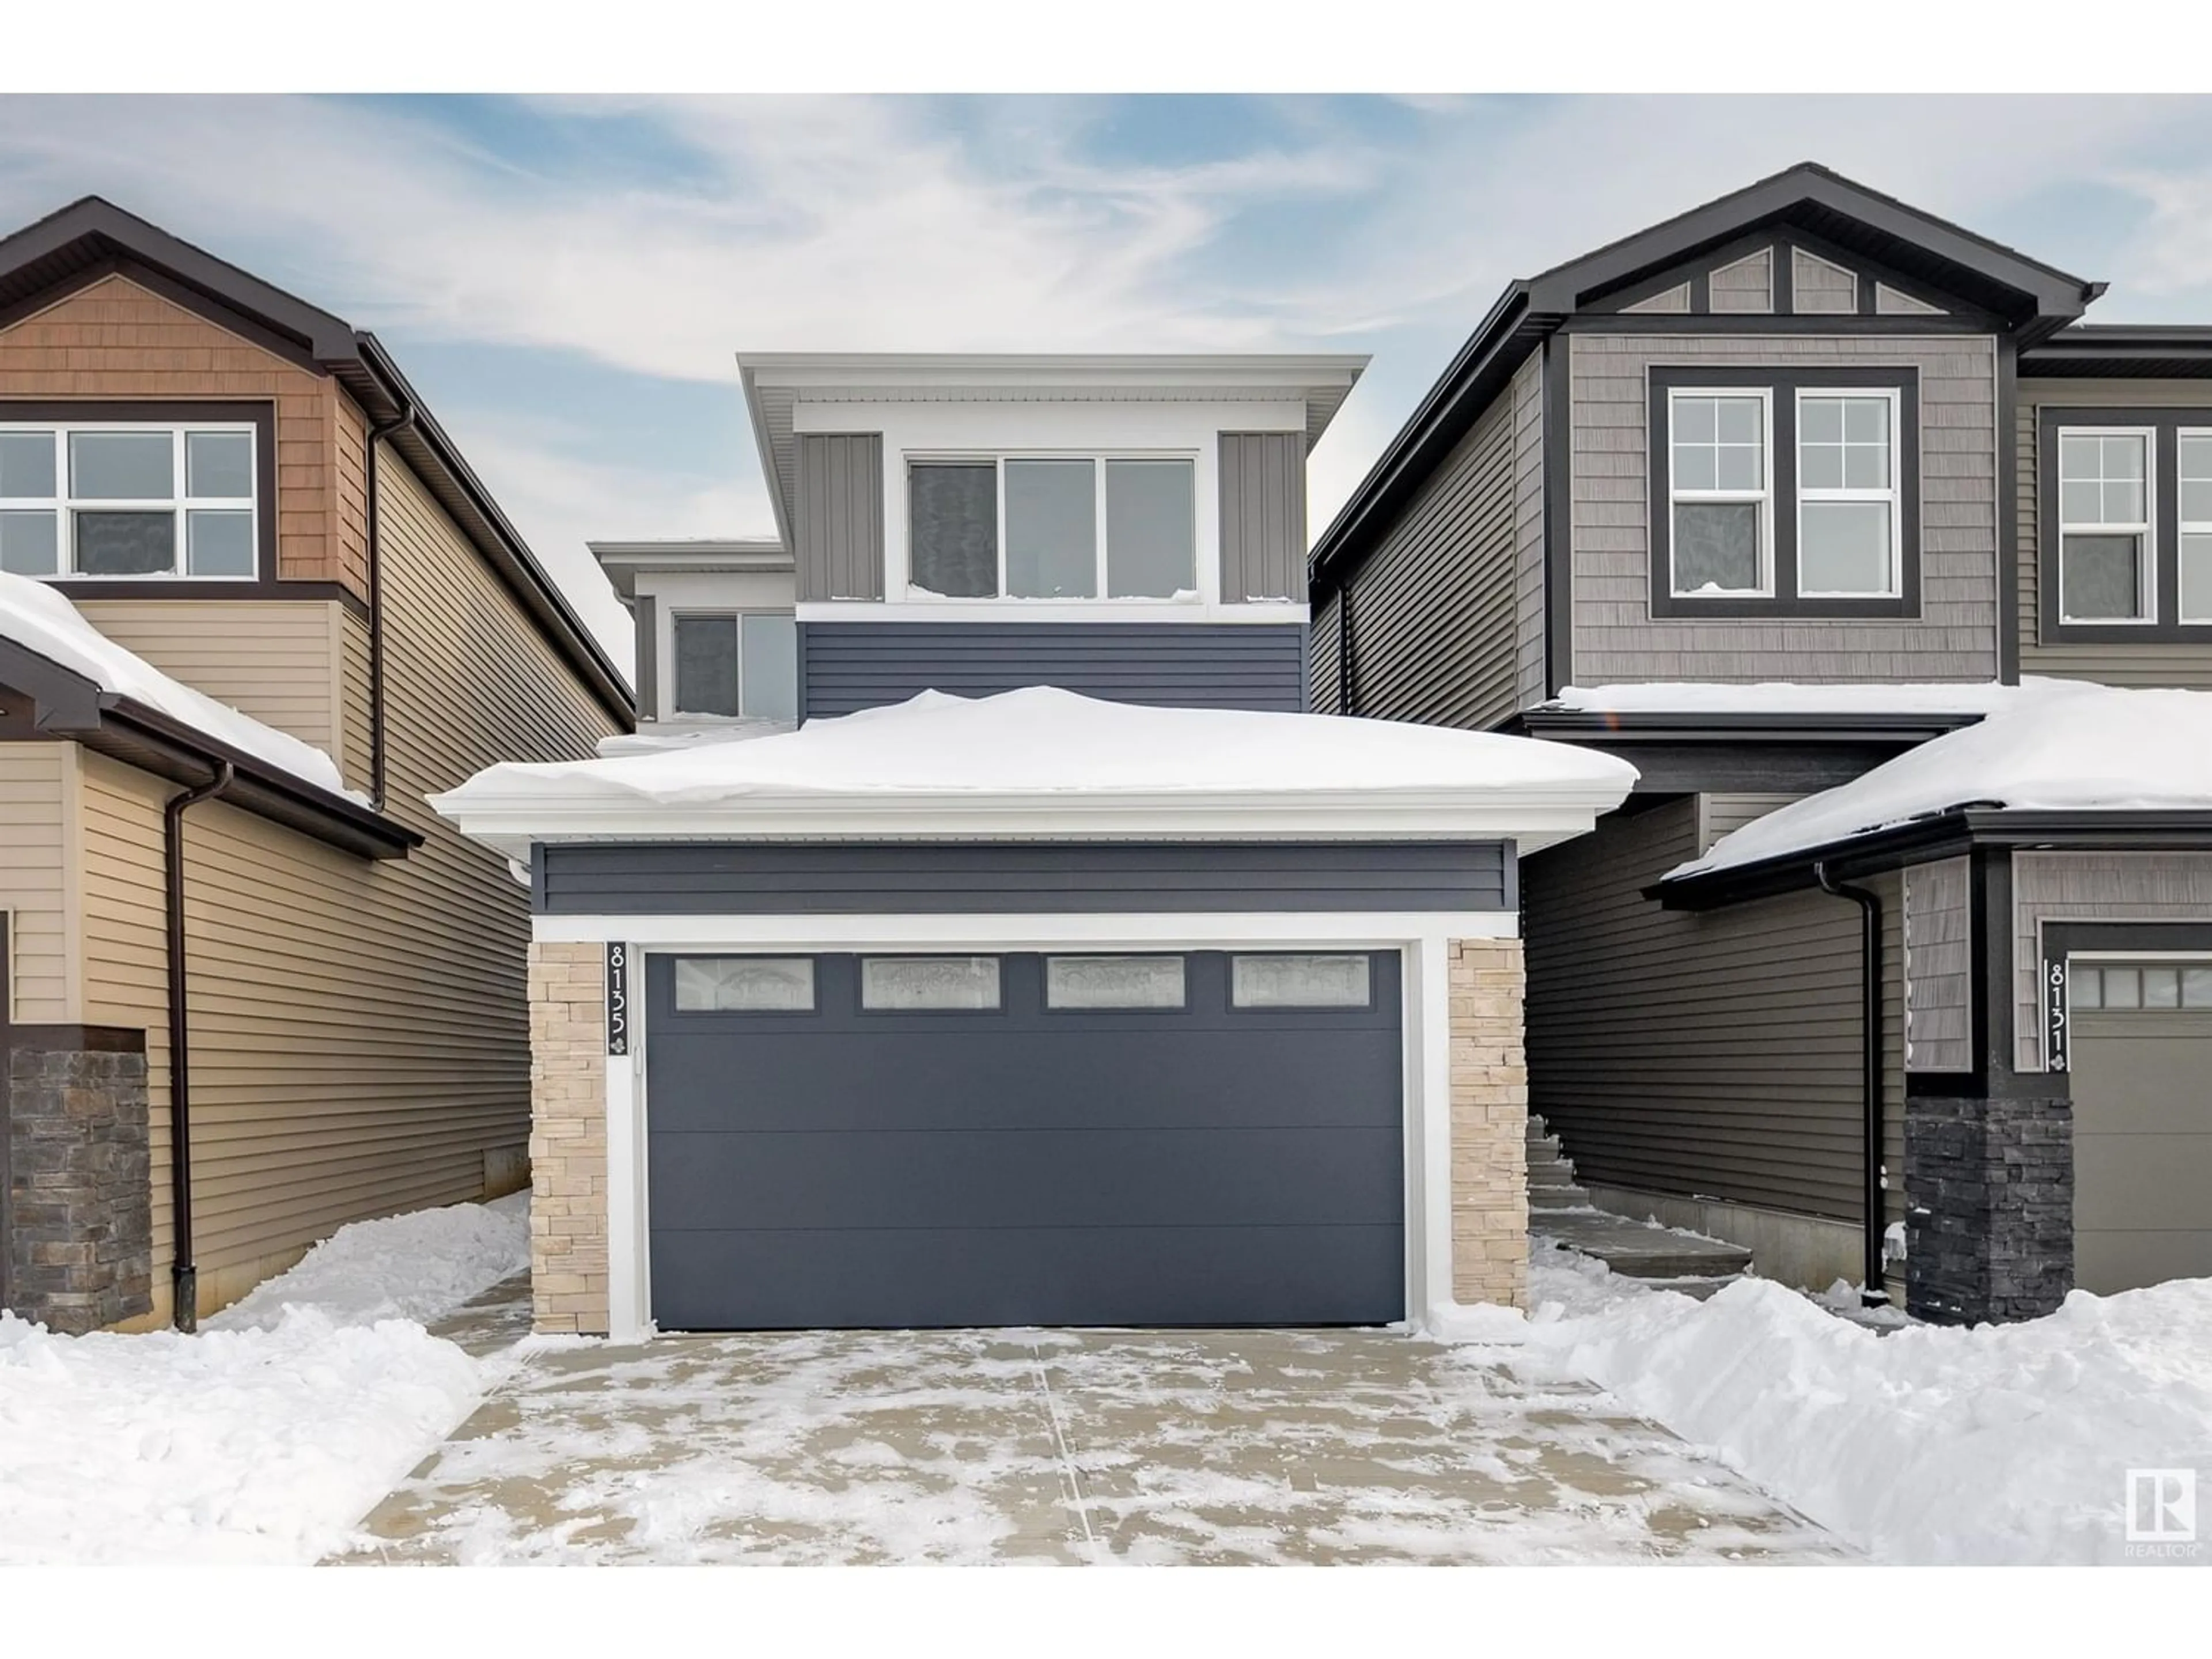 Home with vinyl exterior material for 8135 227 ST NW, Edmonton Alberta T5T7R8